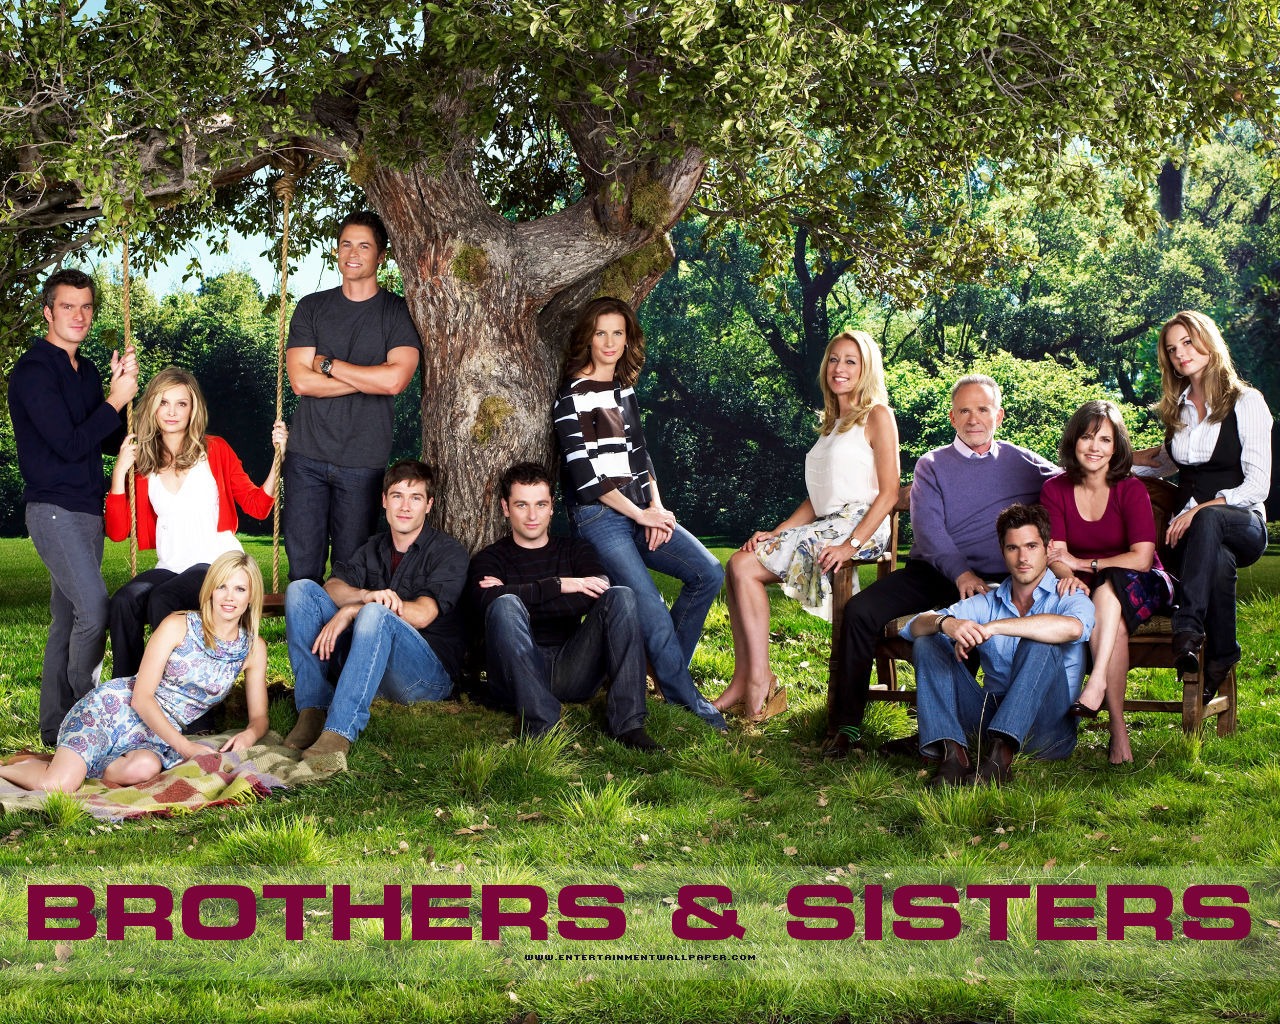 Brothers & Sisters 兄弟姐妹 #9 - 1280x1024